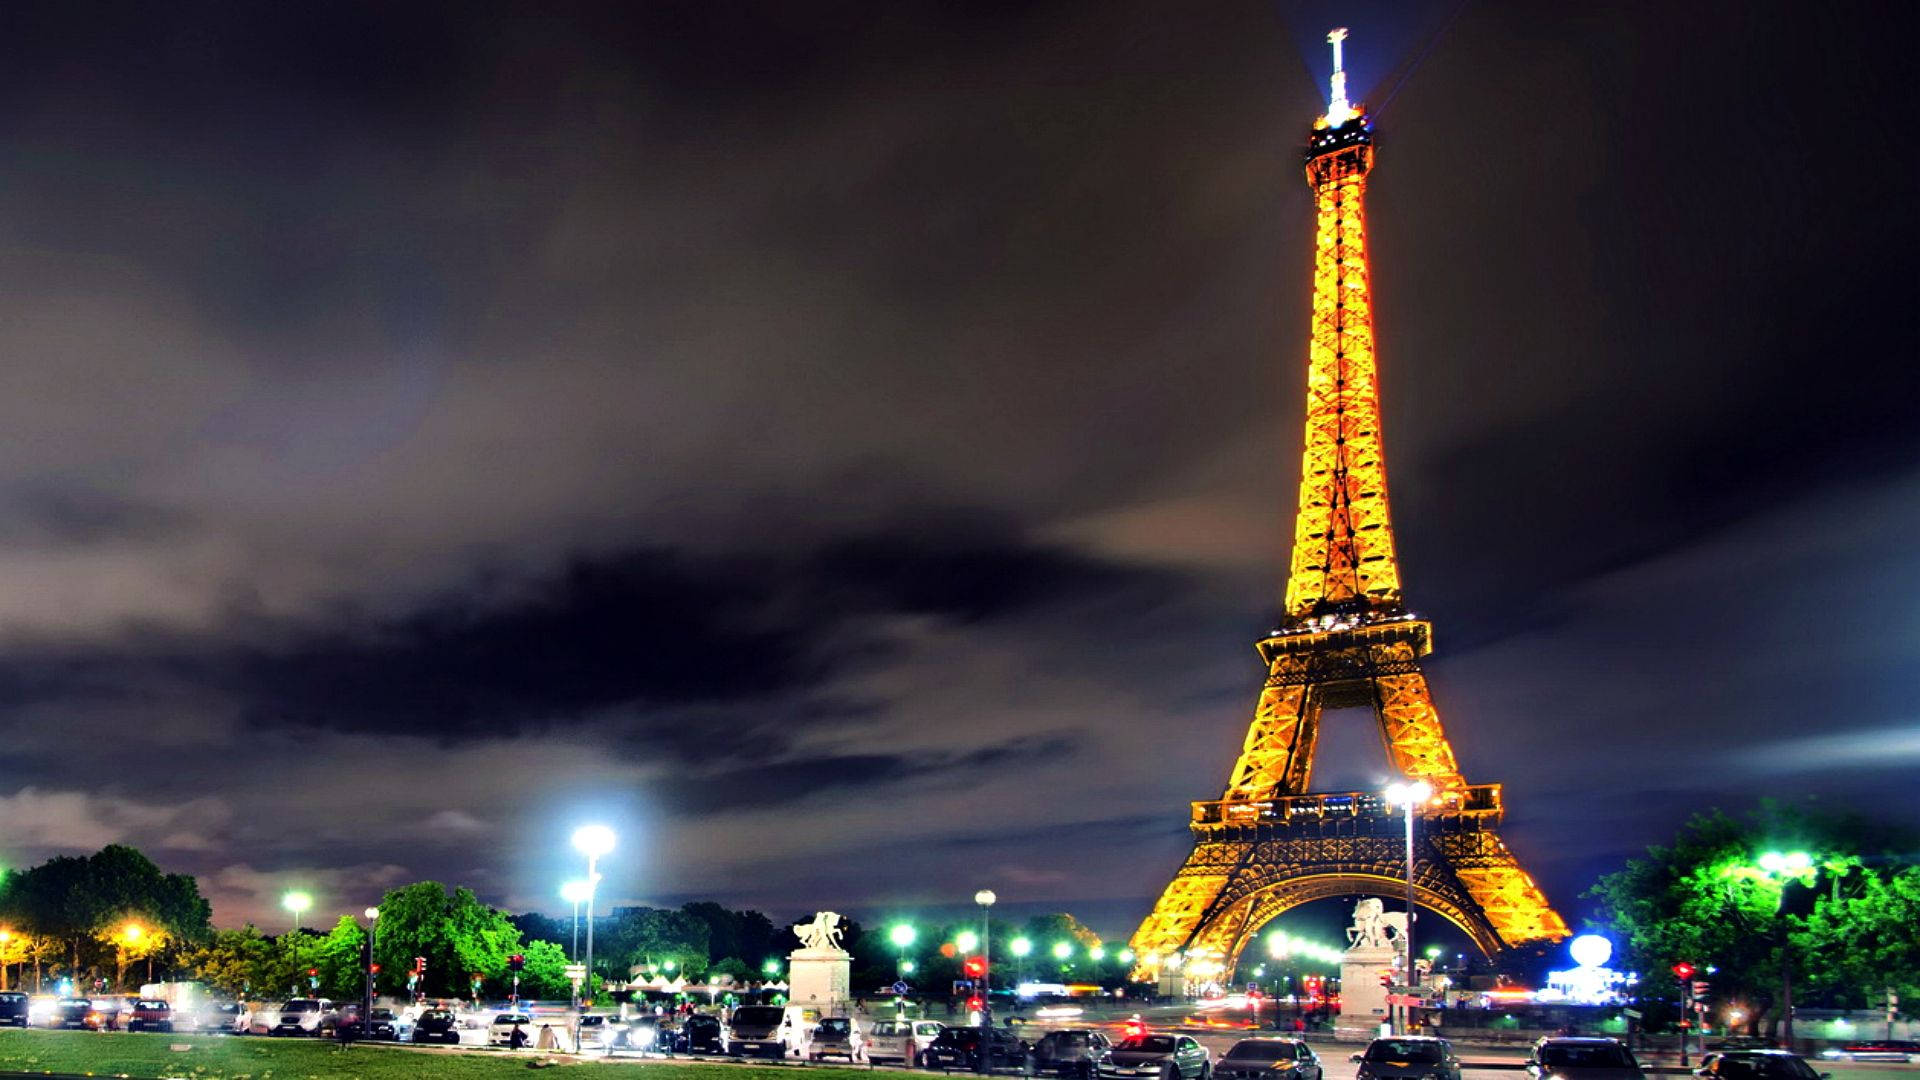 The Eiffel Tower Lit Up At Night Background